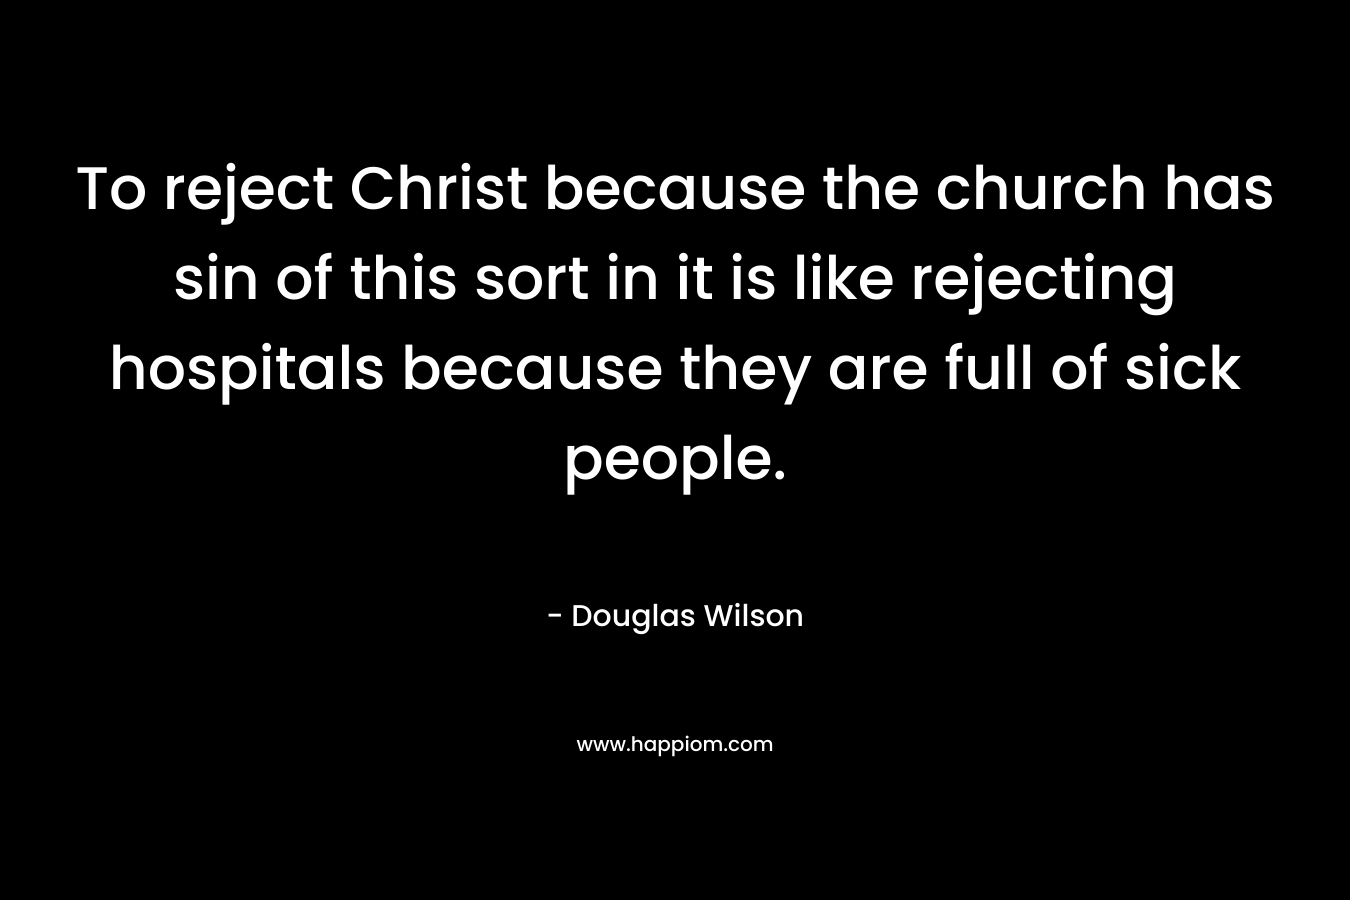 To reject Christ because the church has sin of this sort in it is like rejecting hospitals because they are full of sick people. – Douglas Wilson